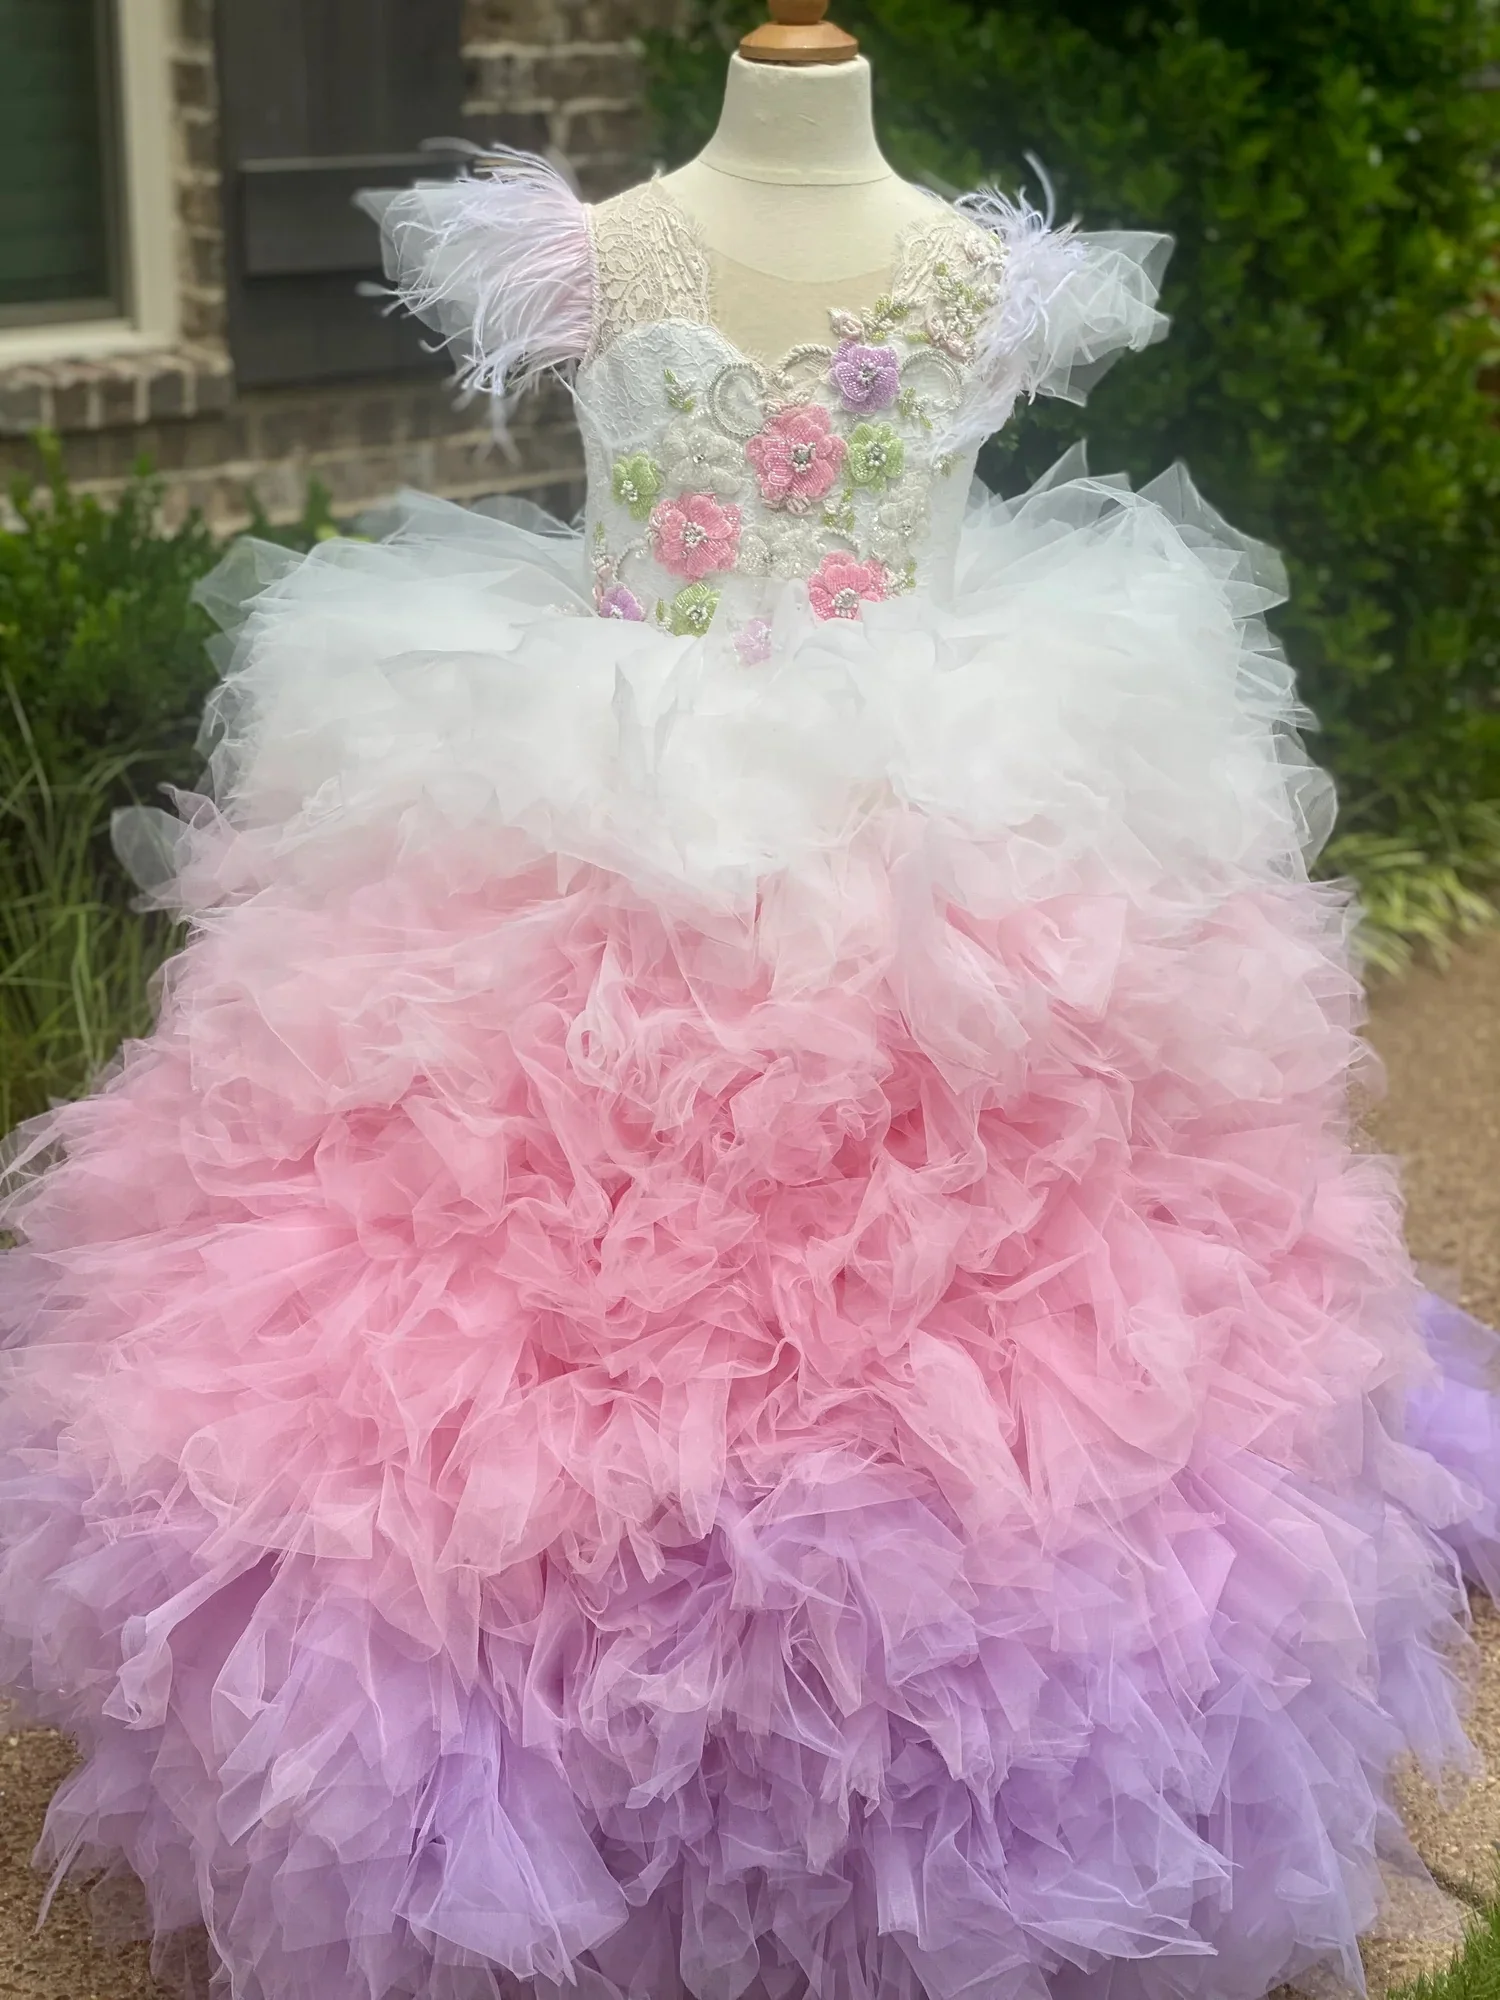 

Tiered Sleeveless Flower Girl Dress For Wedding Layered Ruffles Puffy Princess Birthday Party Gowns Pageant Party Dress